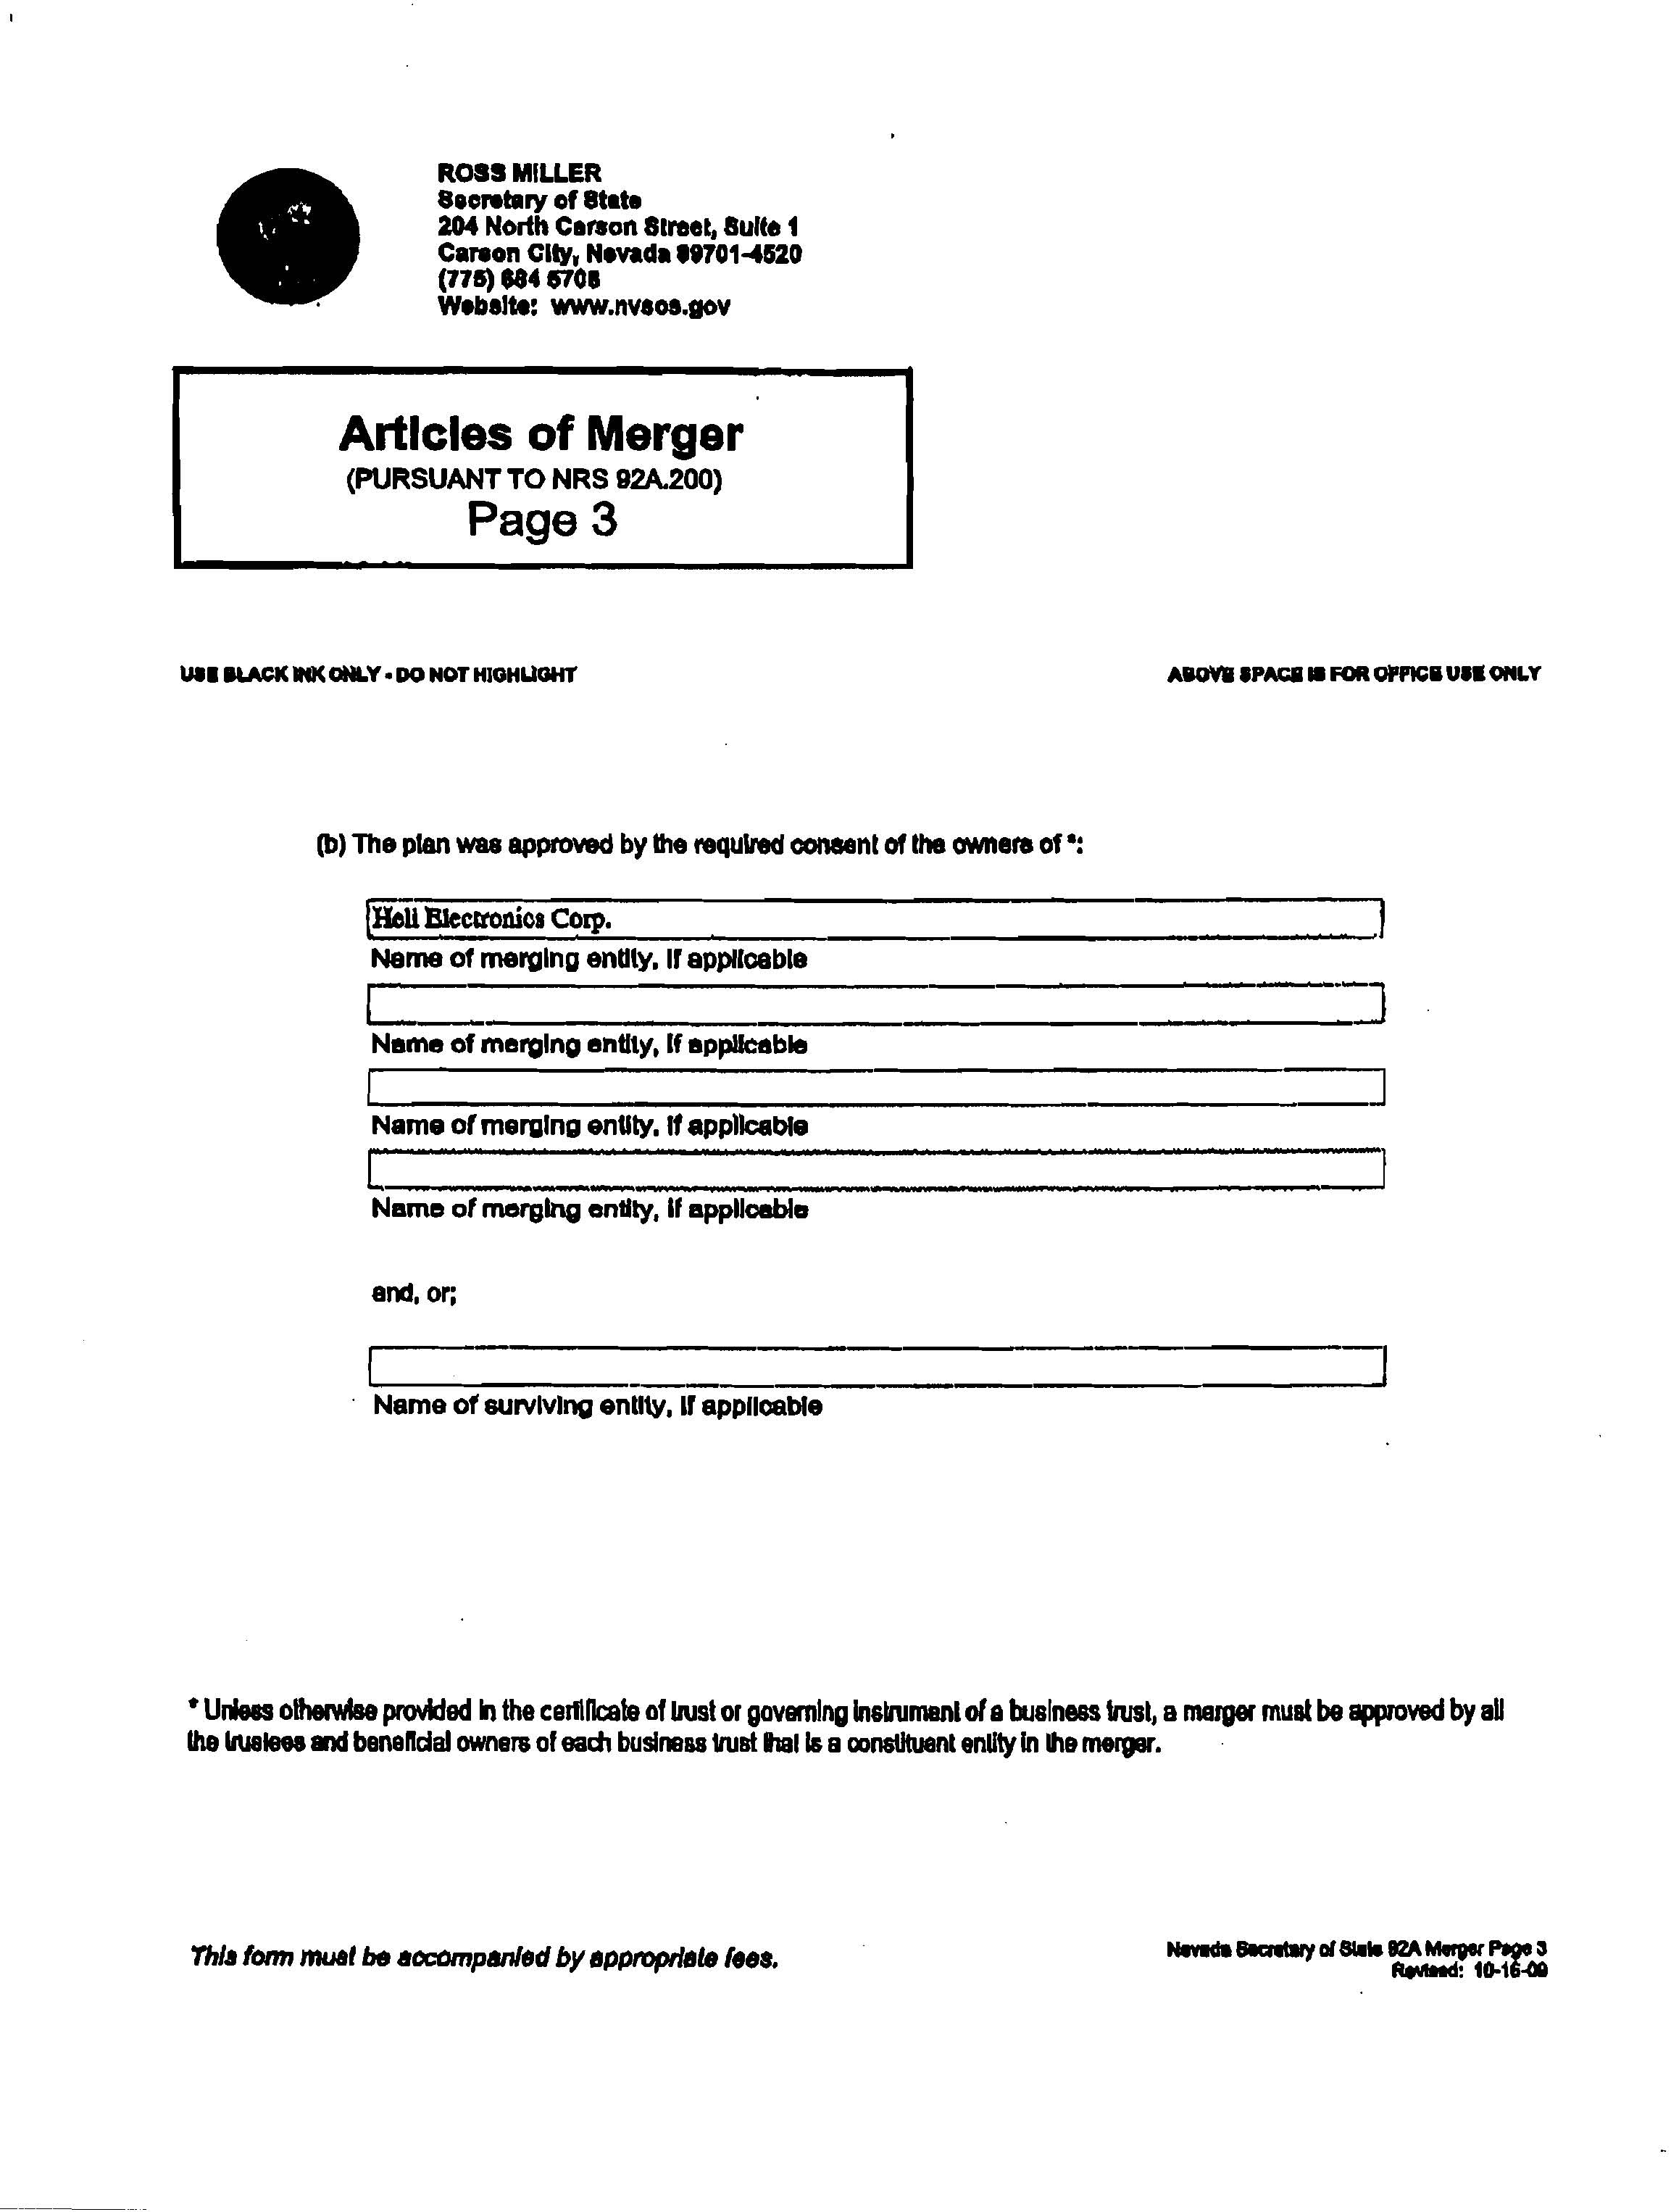 Articles of Merger - Page 3.